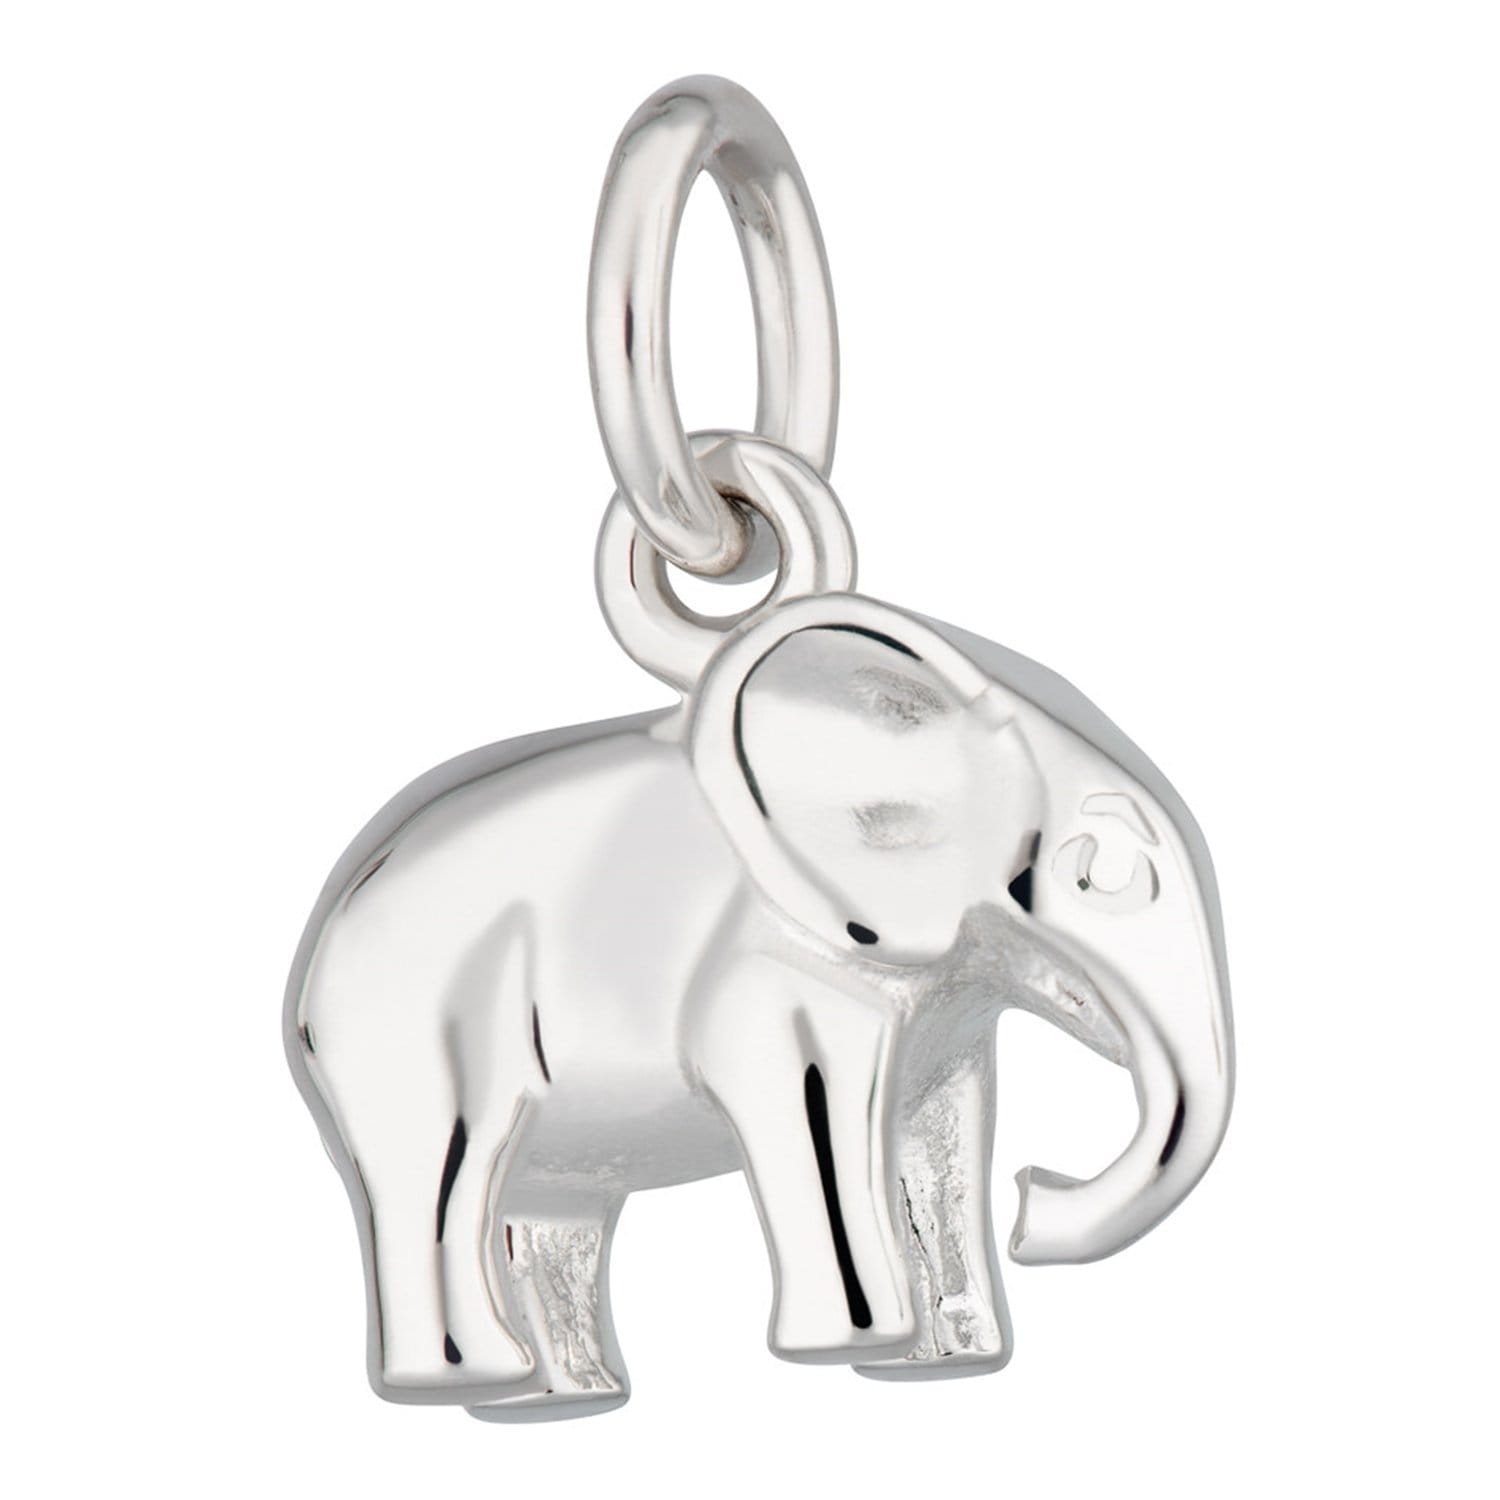 Clearance Silver Elephant Charm Animal Charms (3pcs / 19mm x 18mm / Tibetan Silver / 2 Sided) Exotic Bracelet Charm Zoo African Jewellery CHM1581